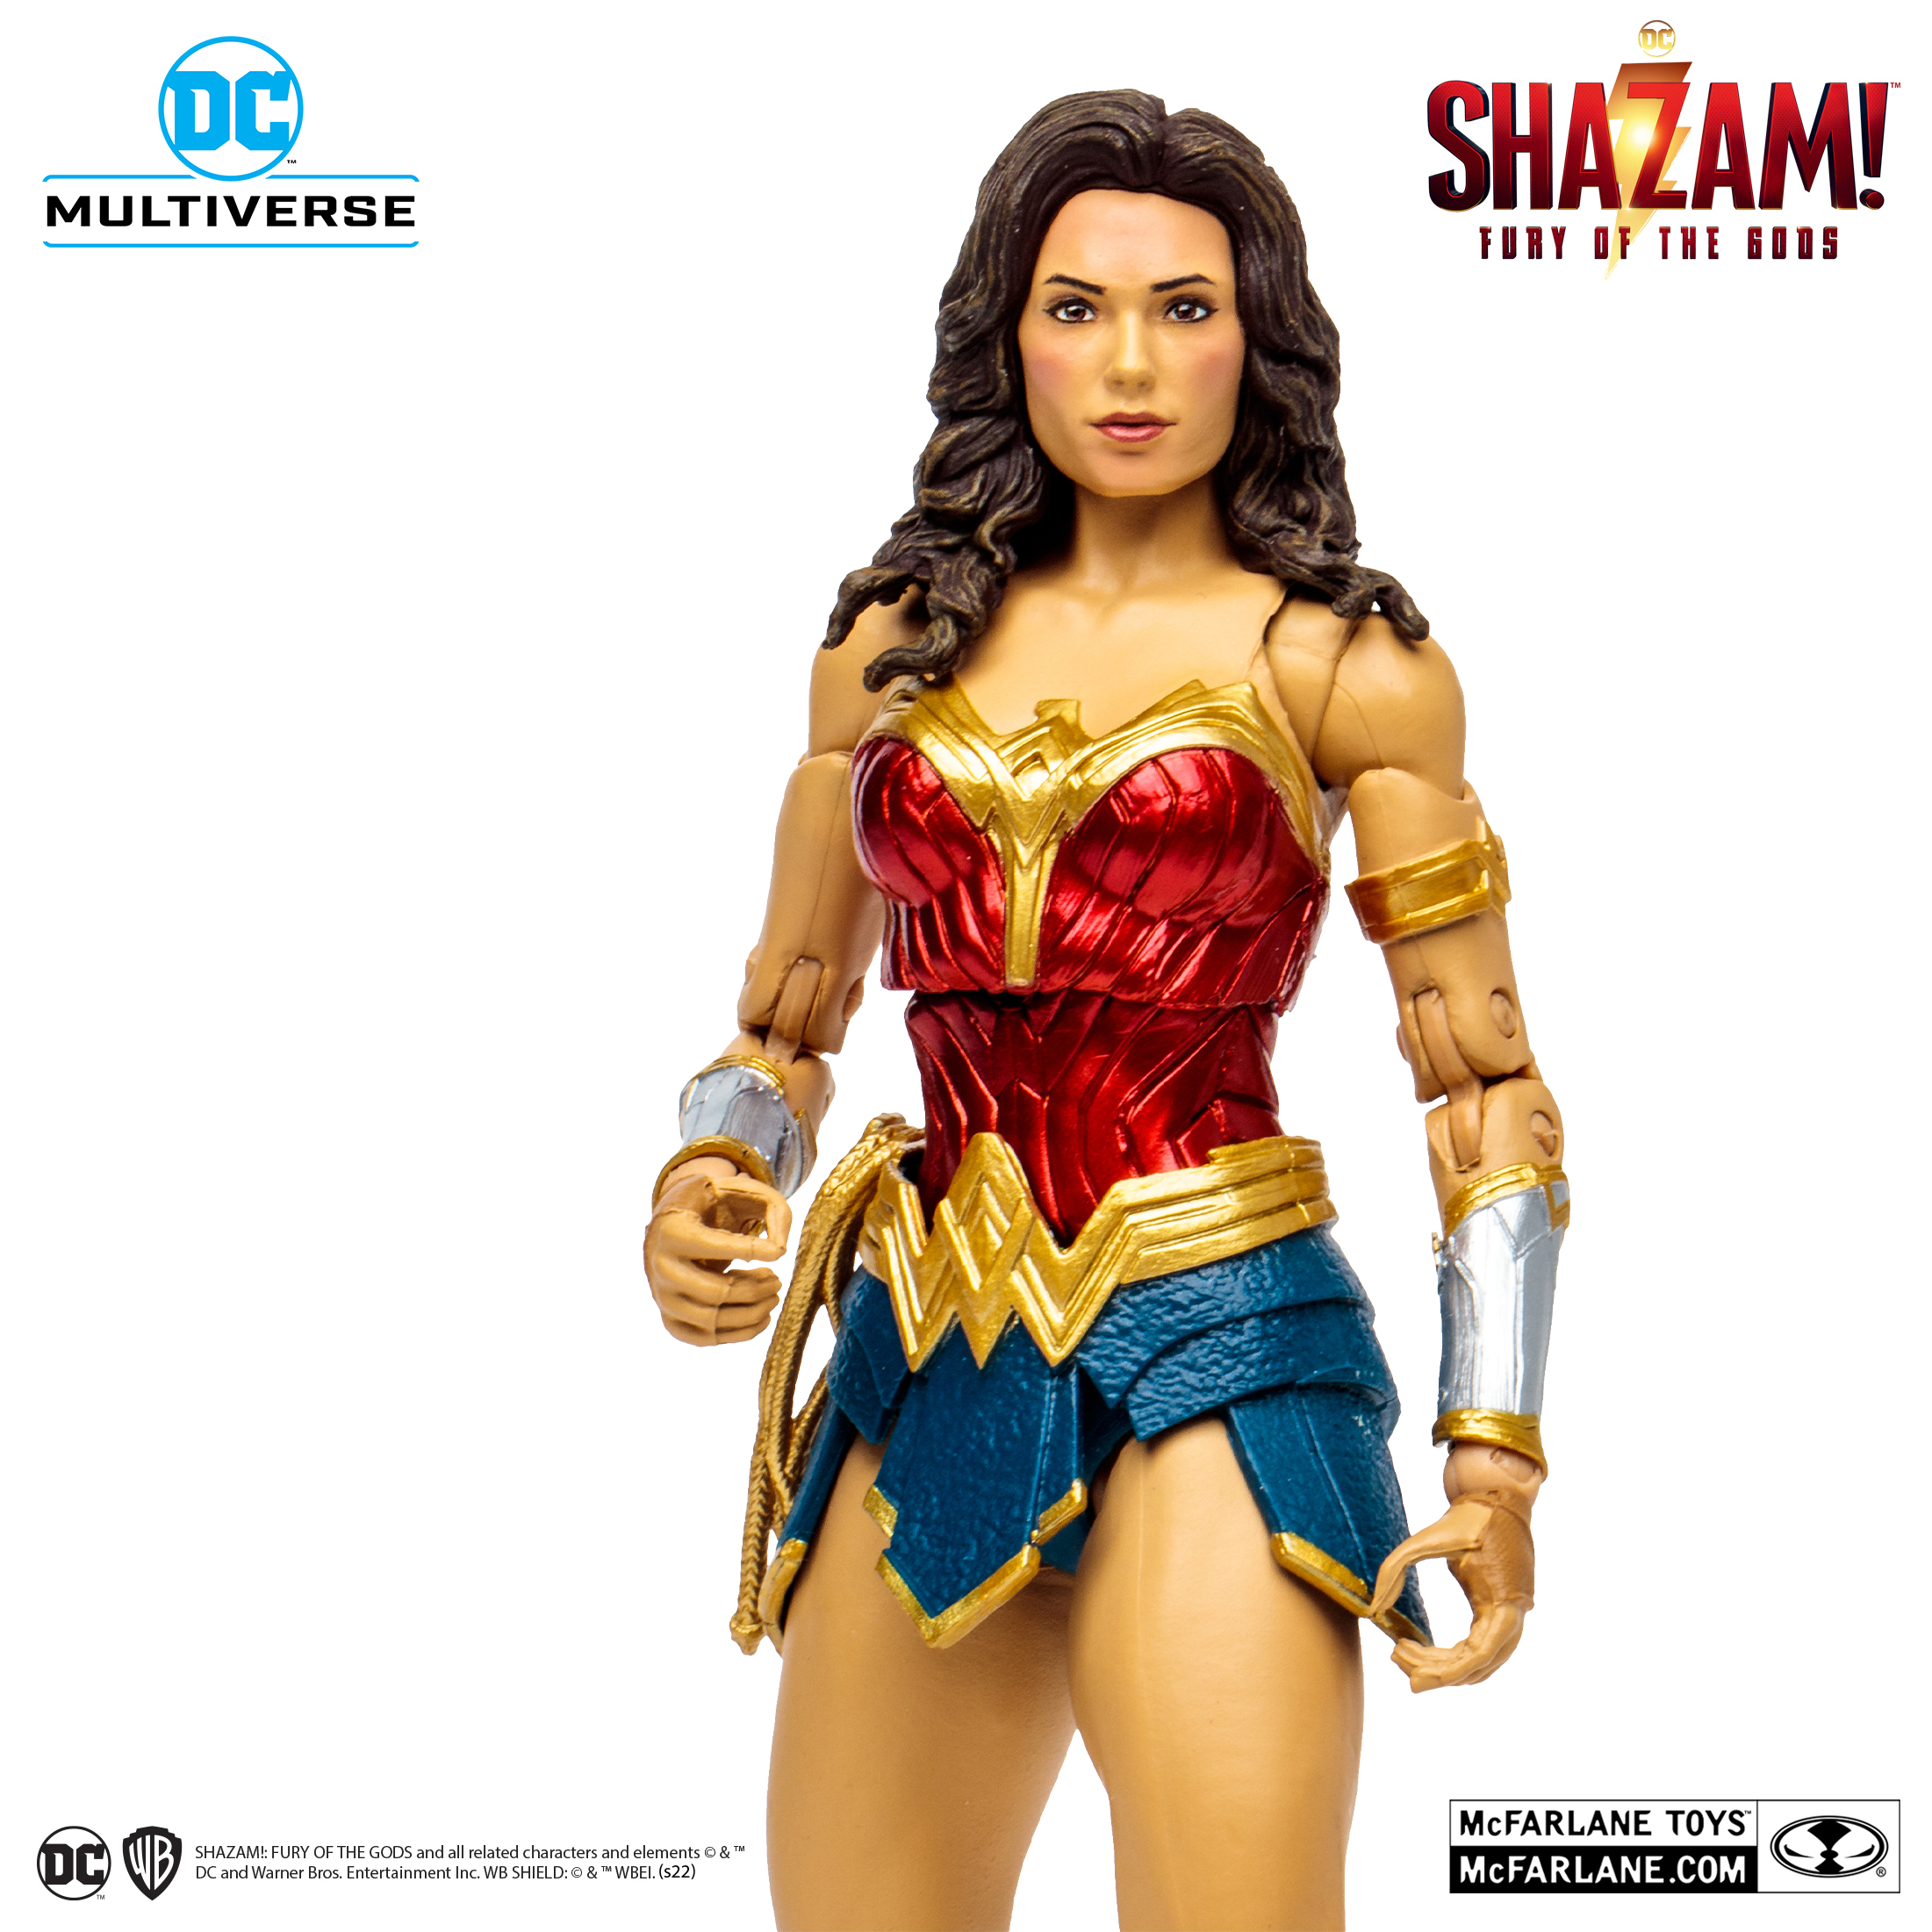 McFarlane Toys - Wonder Woman™ from Shazam! Fury of the Gods is available  for pre-order NOW at select retailers! ➡️   7 scale figure includes  unfurled lasso, wrapped lasso, tiara boomerang, a